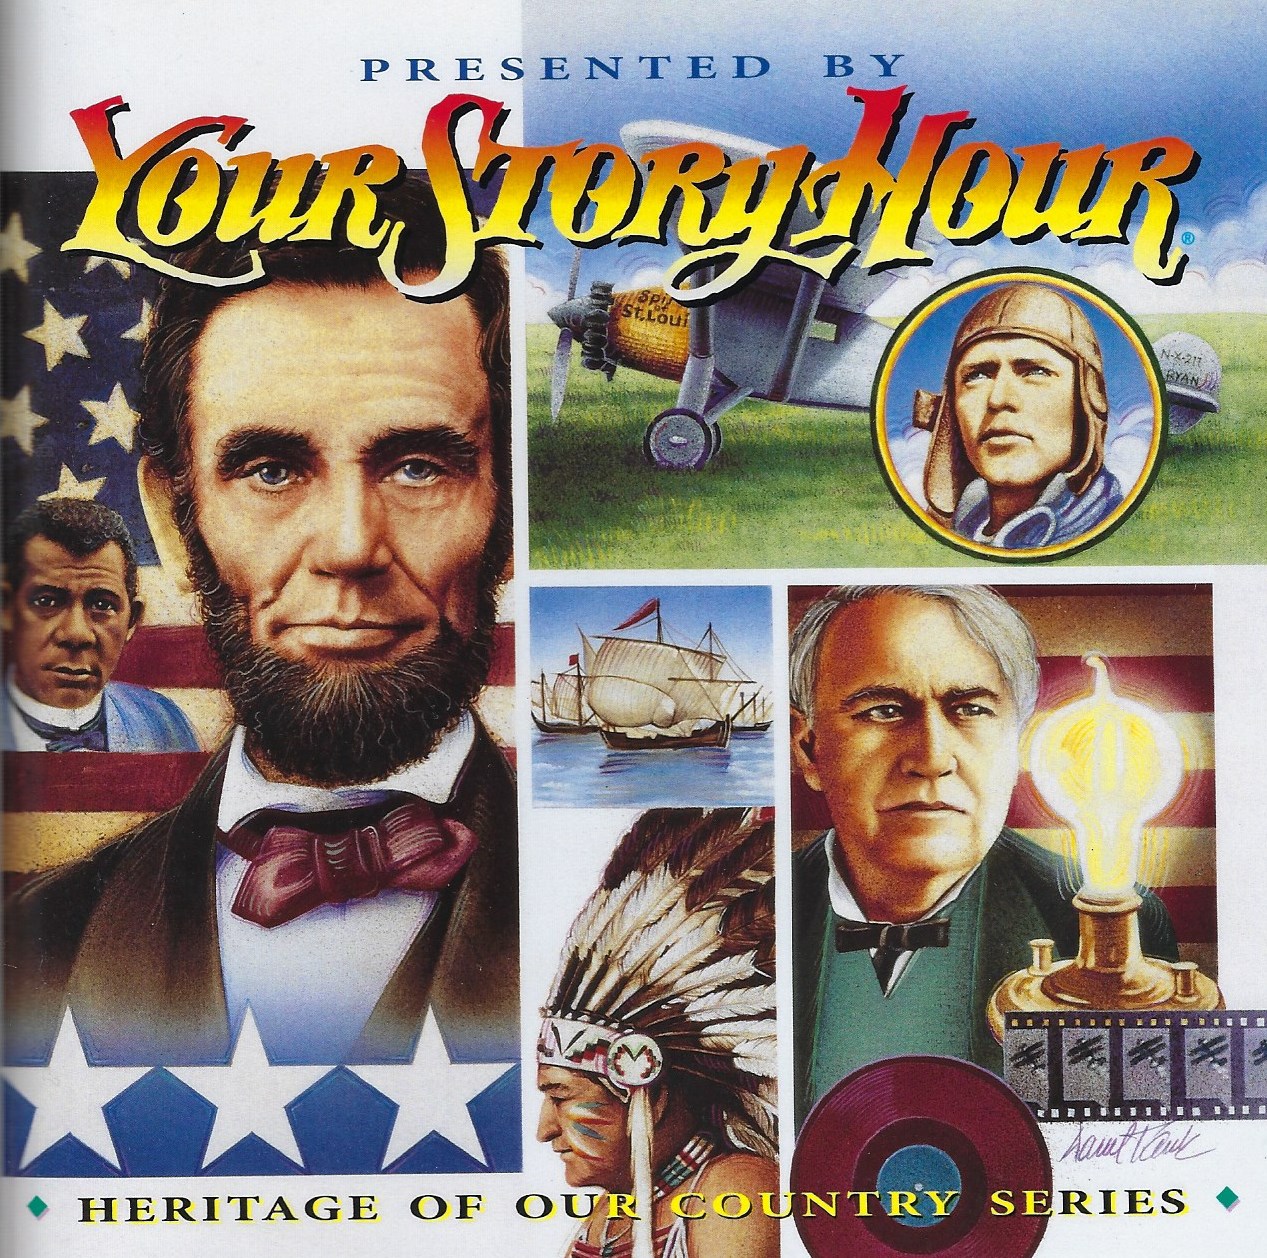 HERITAGE OF OUR COUNTRY CD ALBUM 6 Your Story Hour - Click Image to Close